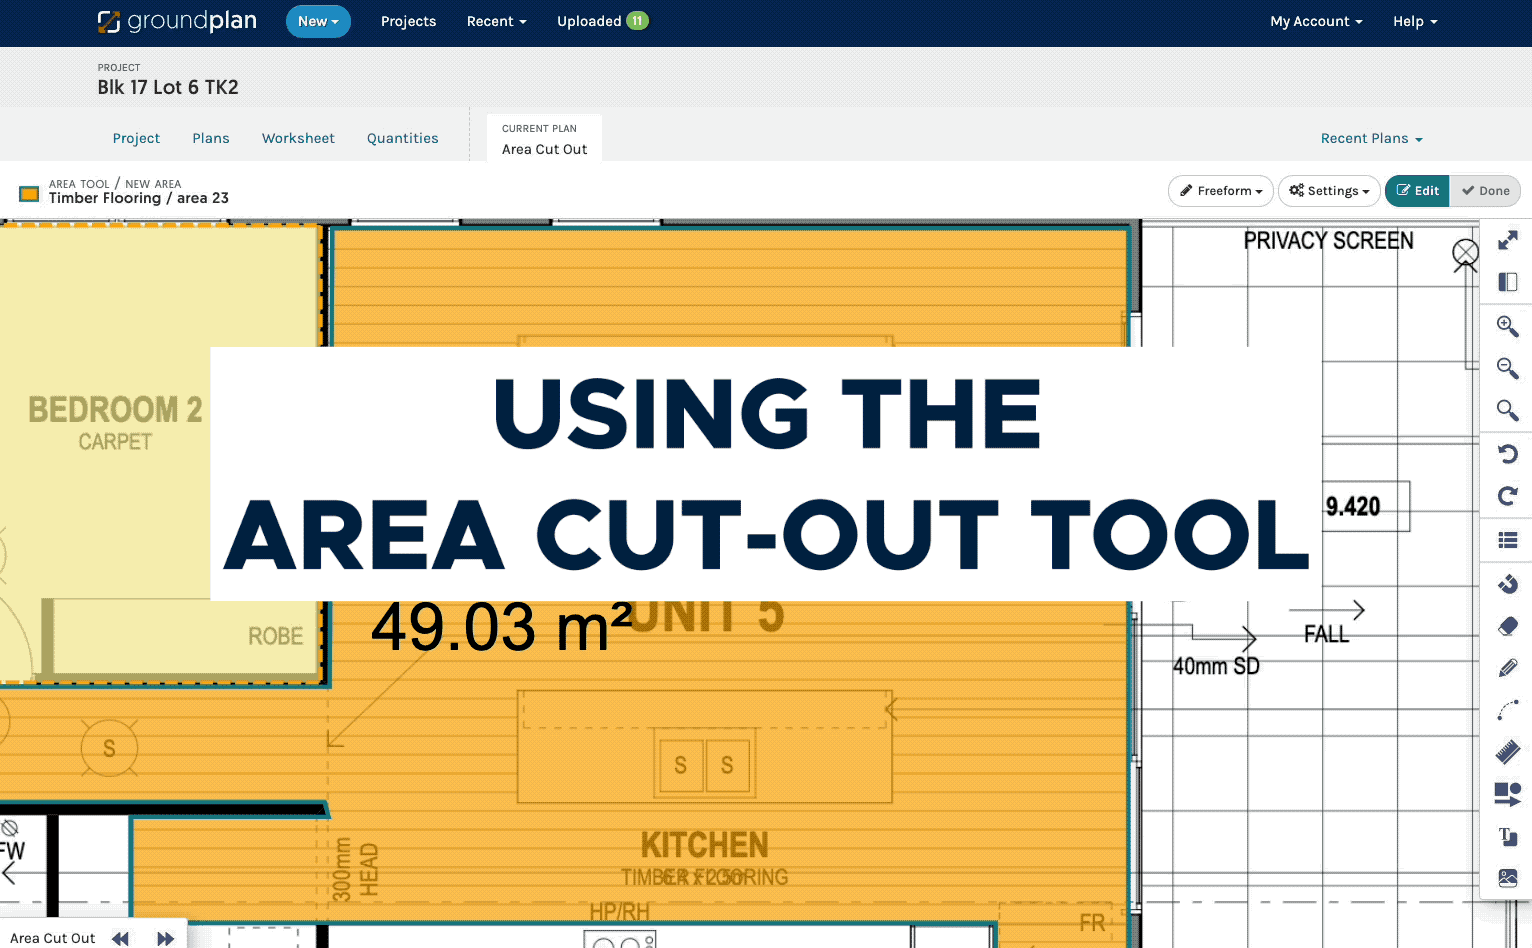 D3 - using the area cut-out tool